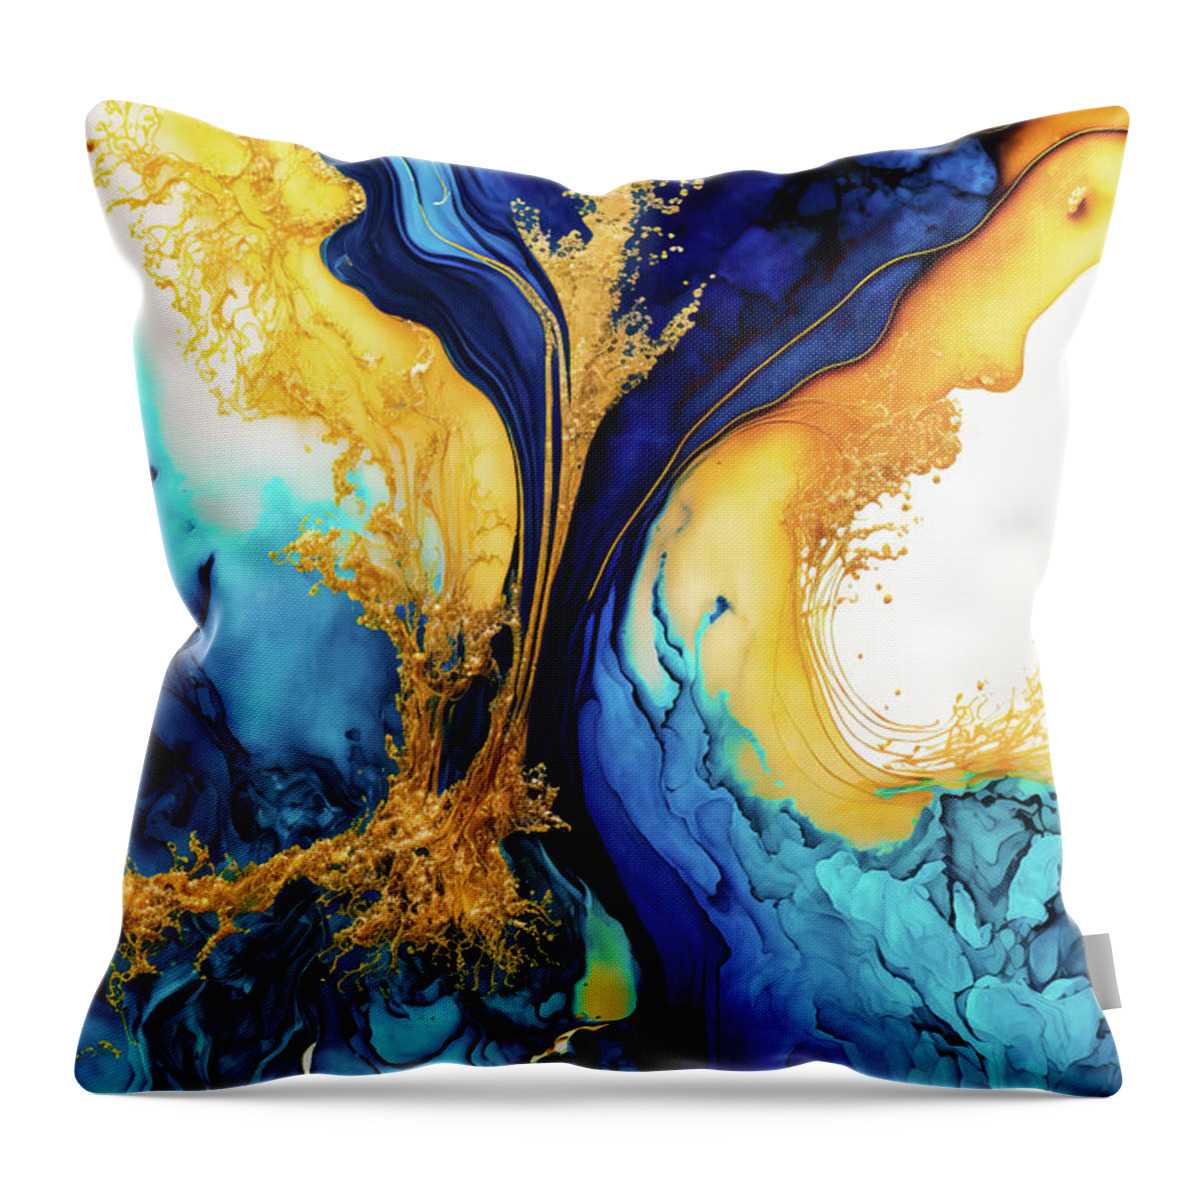 Abstract Throw Pillow featuring the digital art Abstract Art Alcohol Ink Style 01 Blue and Gold by Matthias Hauser